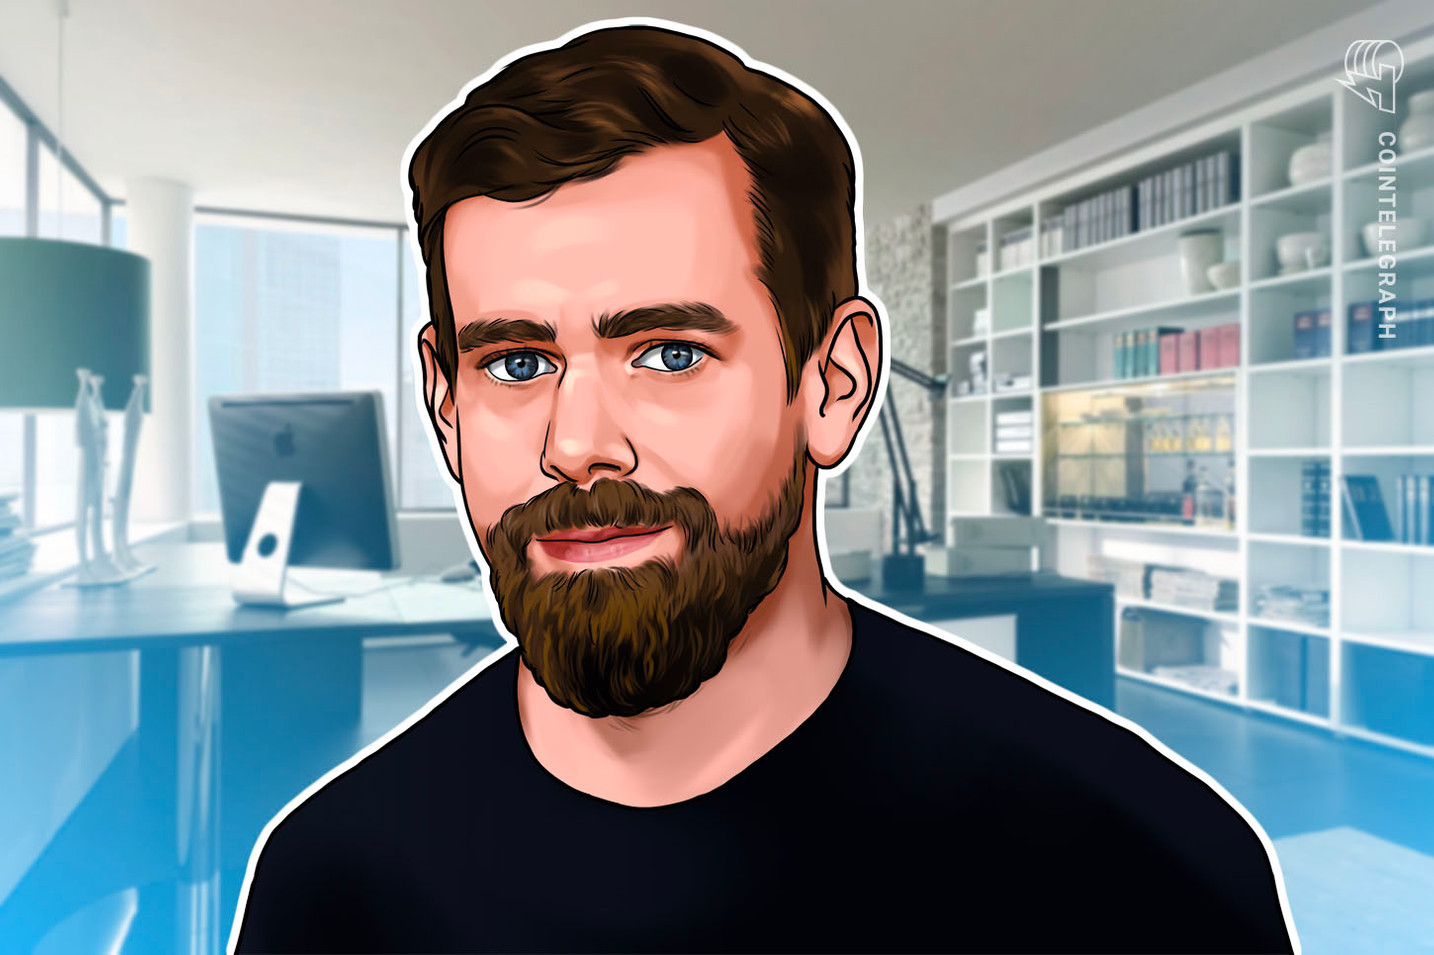 Jack Dorsey warns that FinCEN regulations will drive crypto users offshore